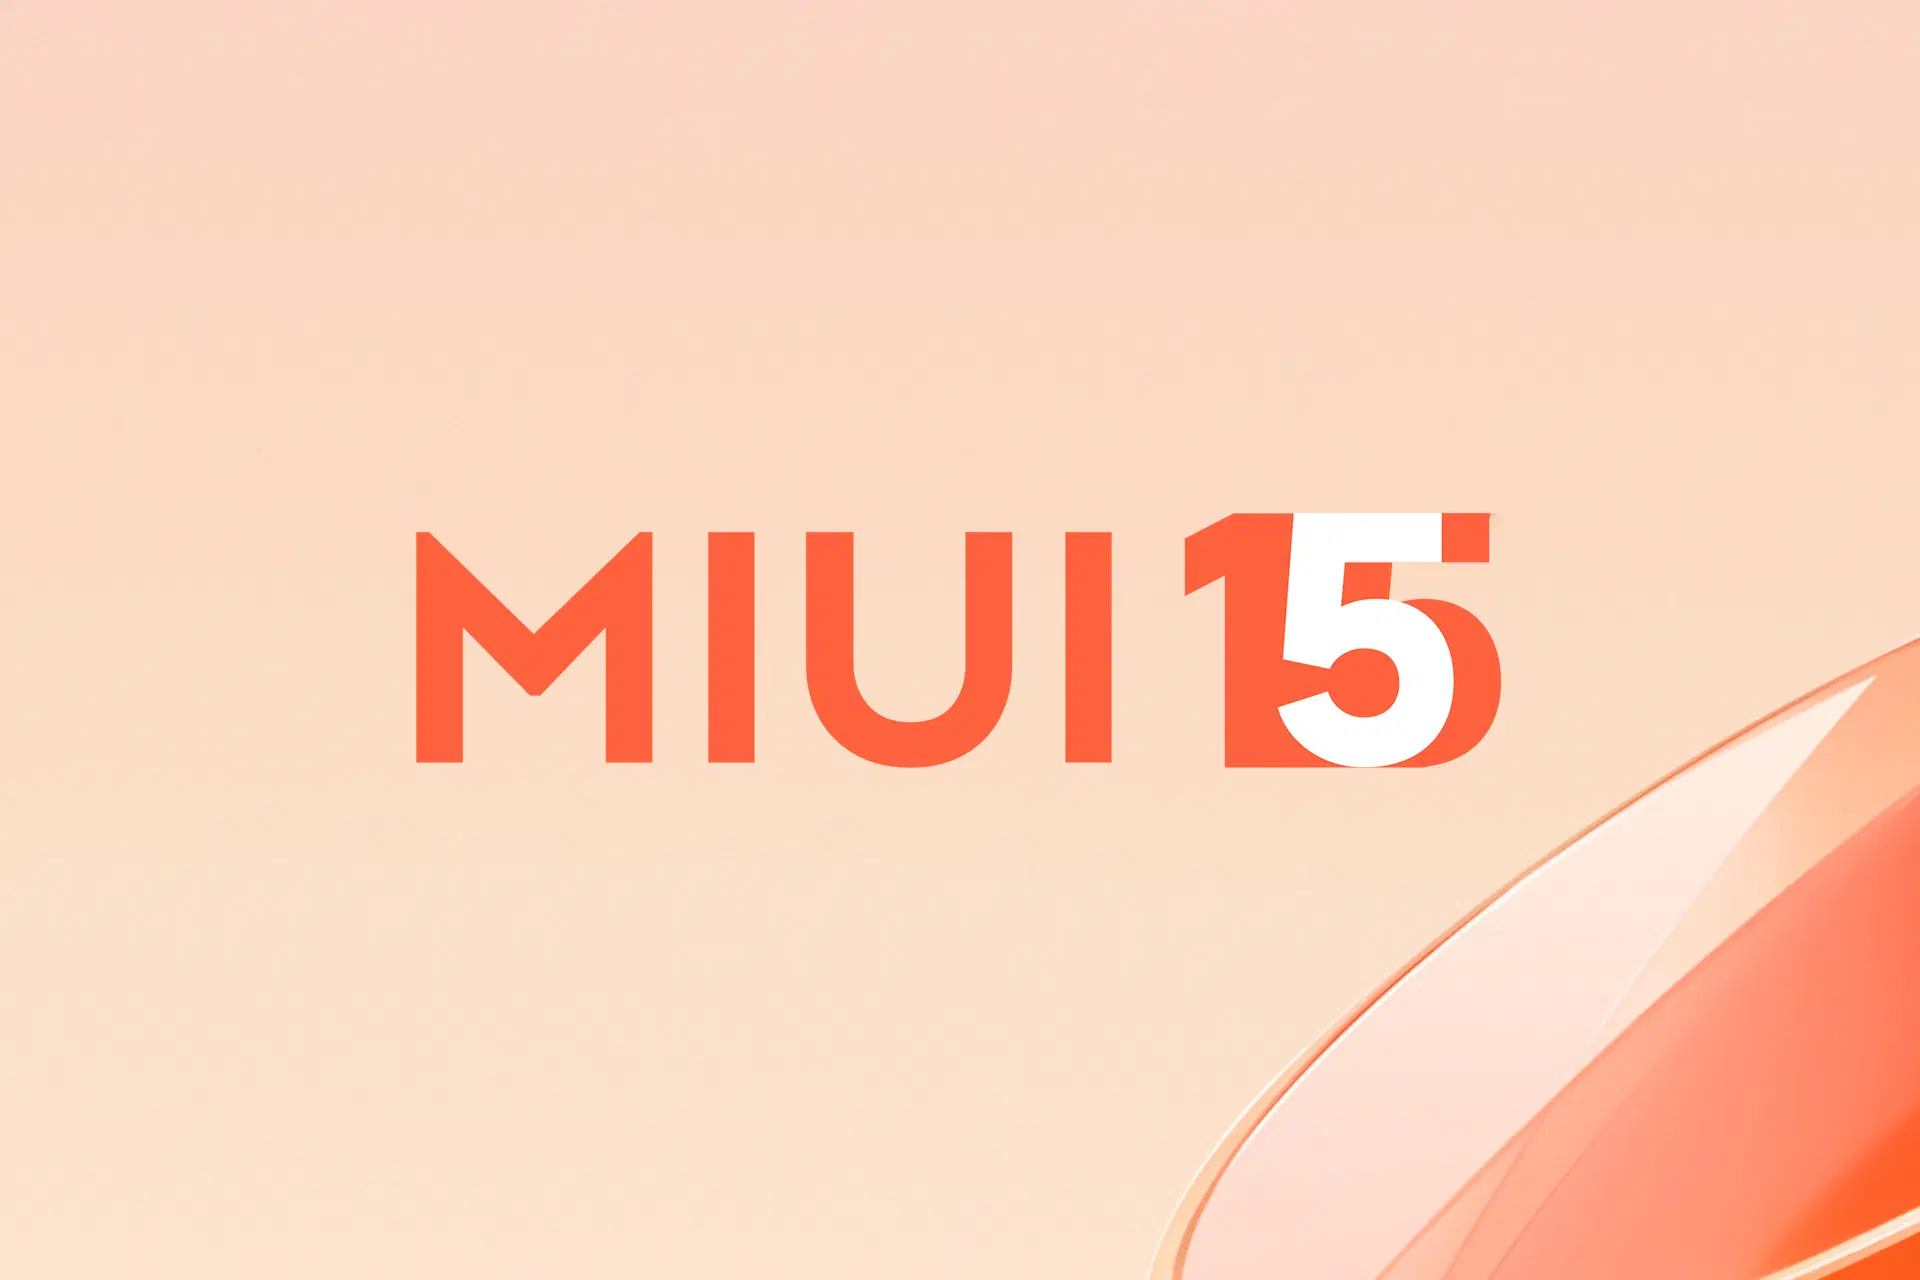 Release Date and Timeline of Miui 15